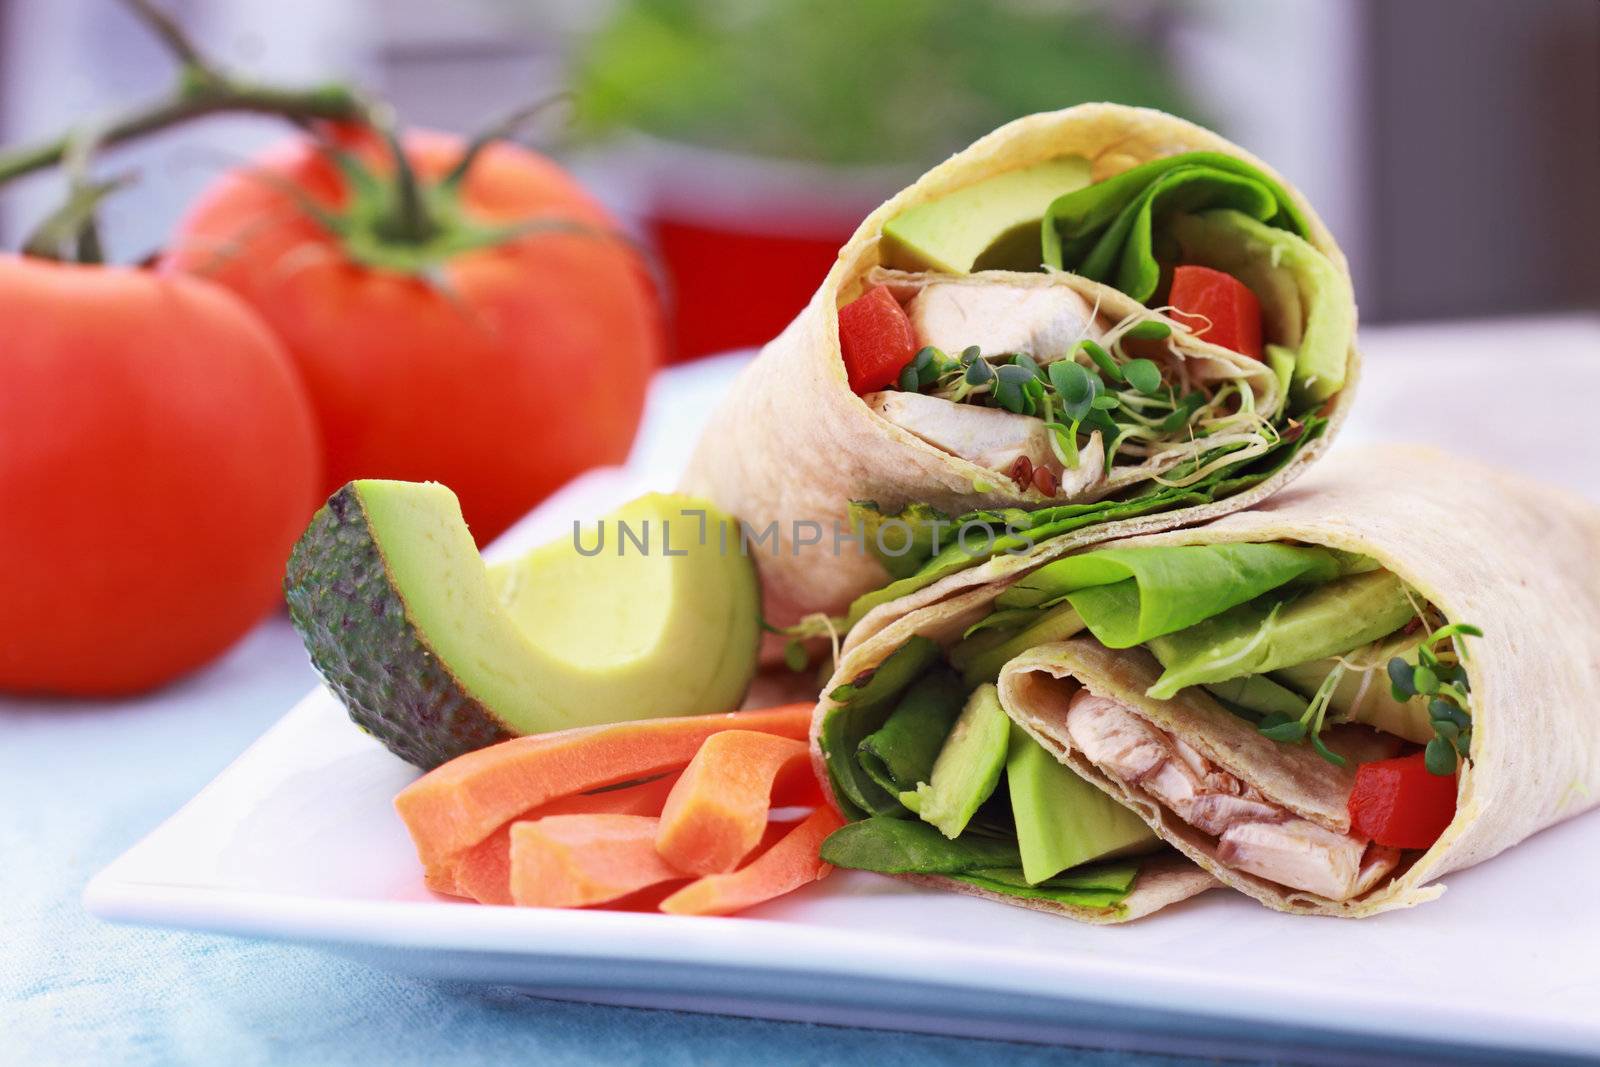 Vegan sandwich wrap with Lavish bread made from flax, oats and whole wheat. Stuffed with fresh spinach, sprouts, mushrooms, red peppers and avocados for a healthy lunch.